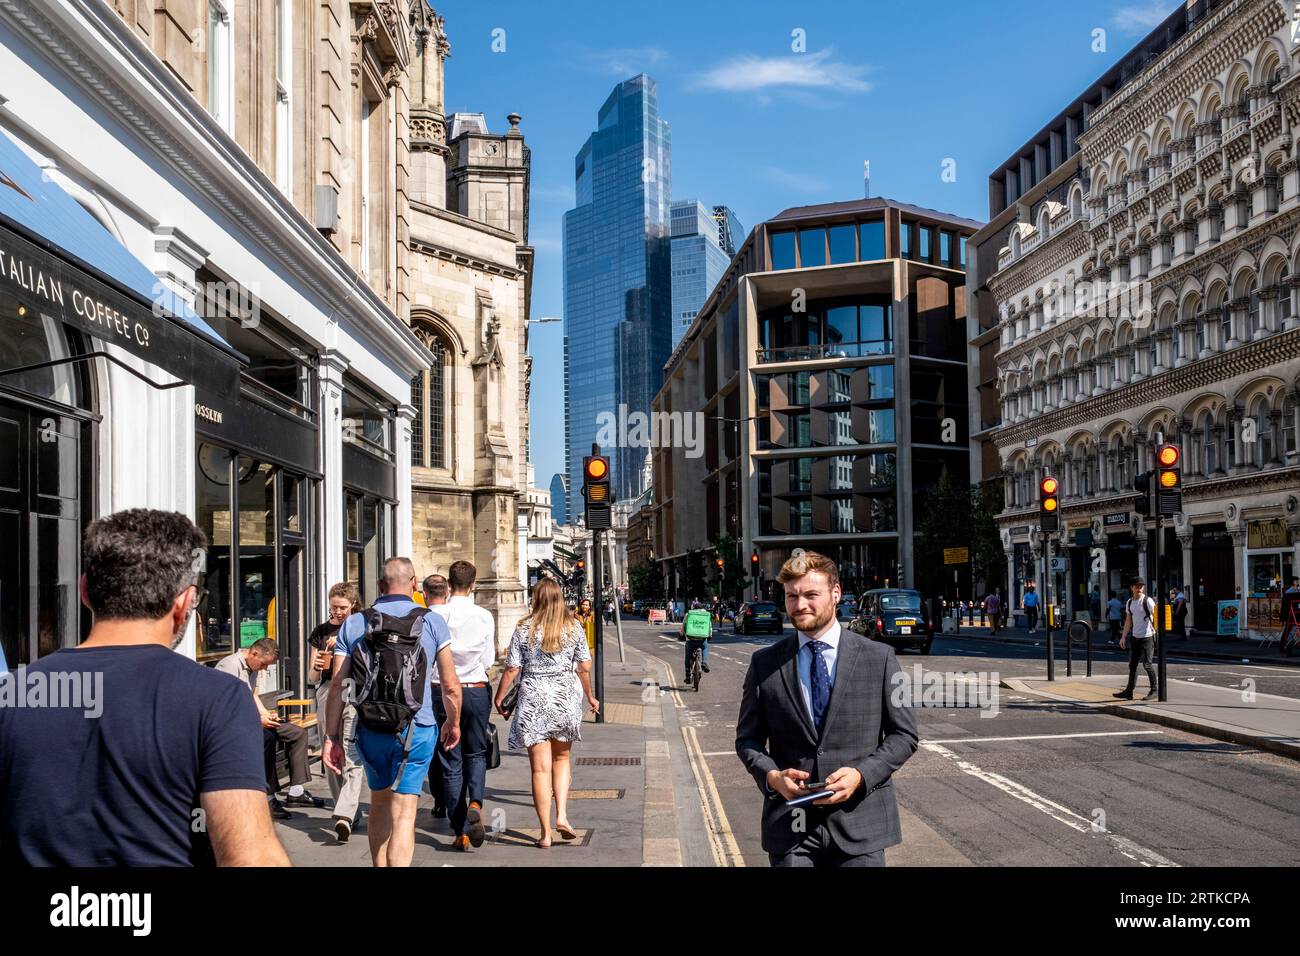 A View Down Queen Victoria Street Towards The City of London, London, UK. Stock Photo